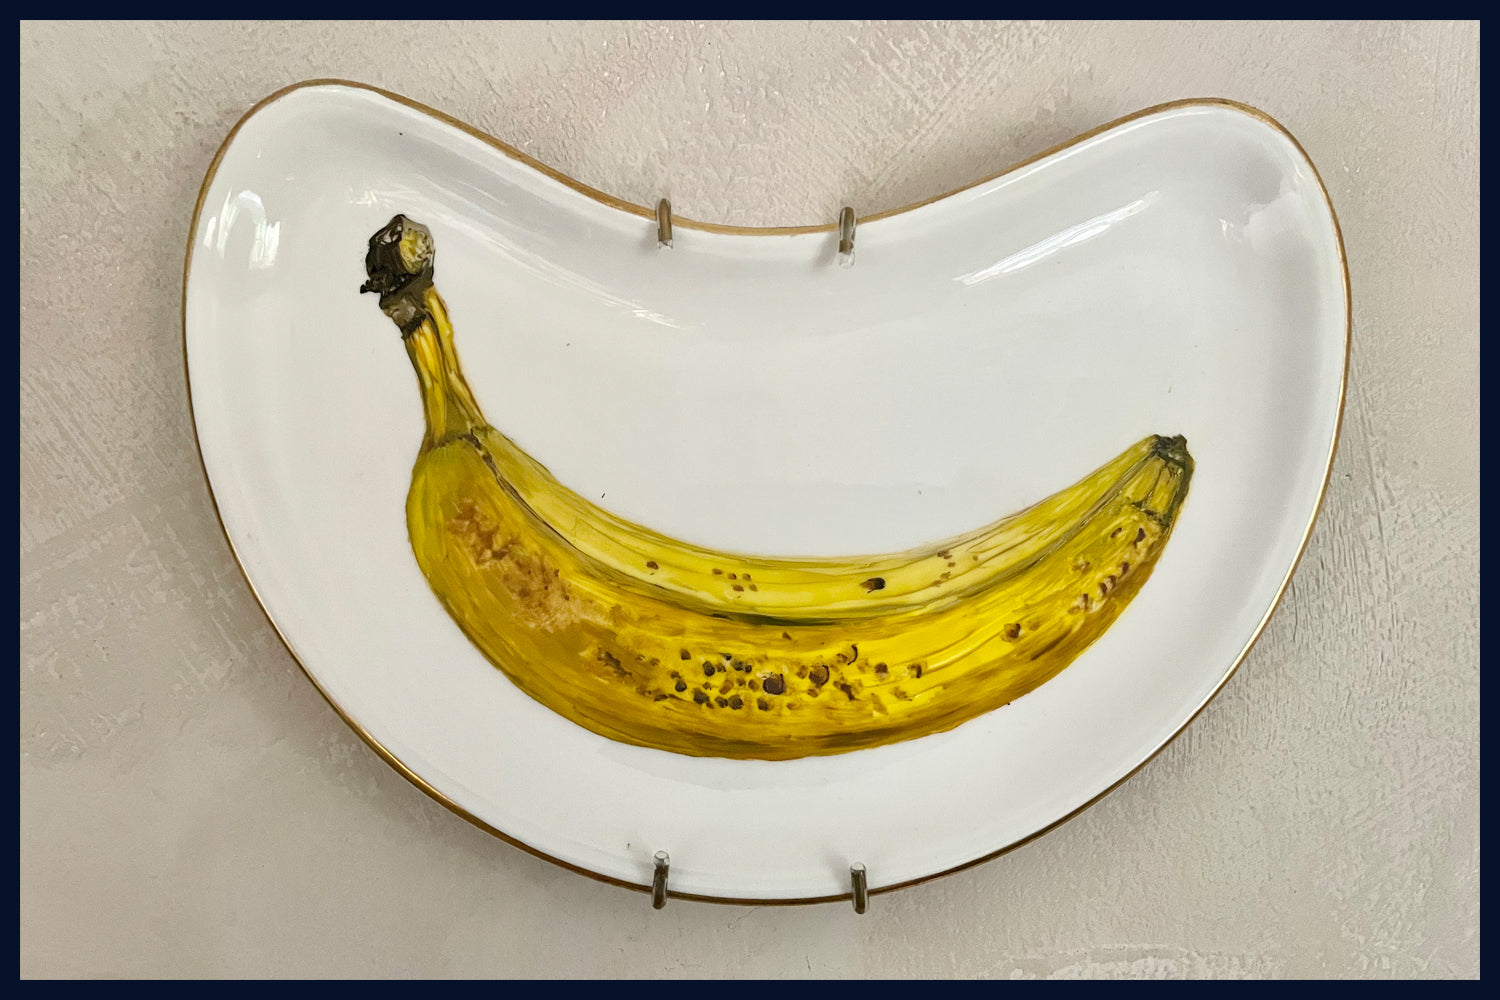 Plated: original fine art oil painting on a vintage side plate - banana